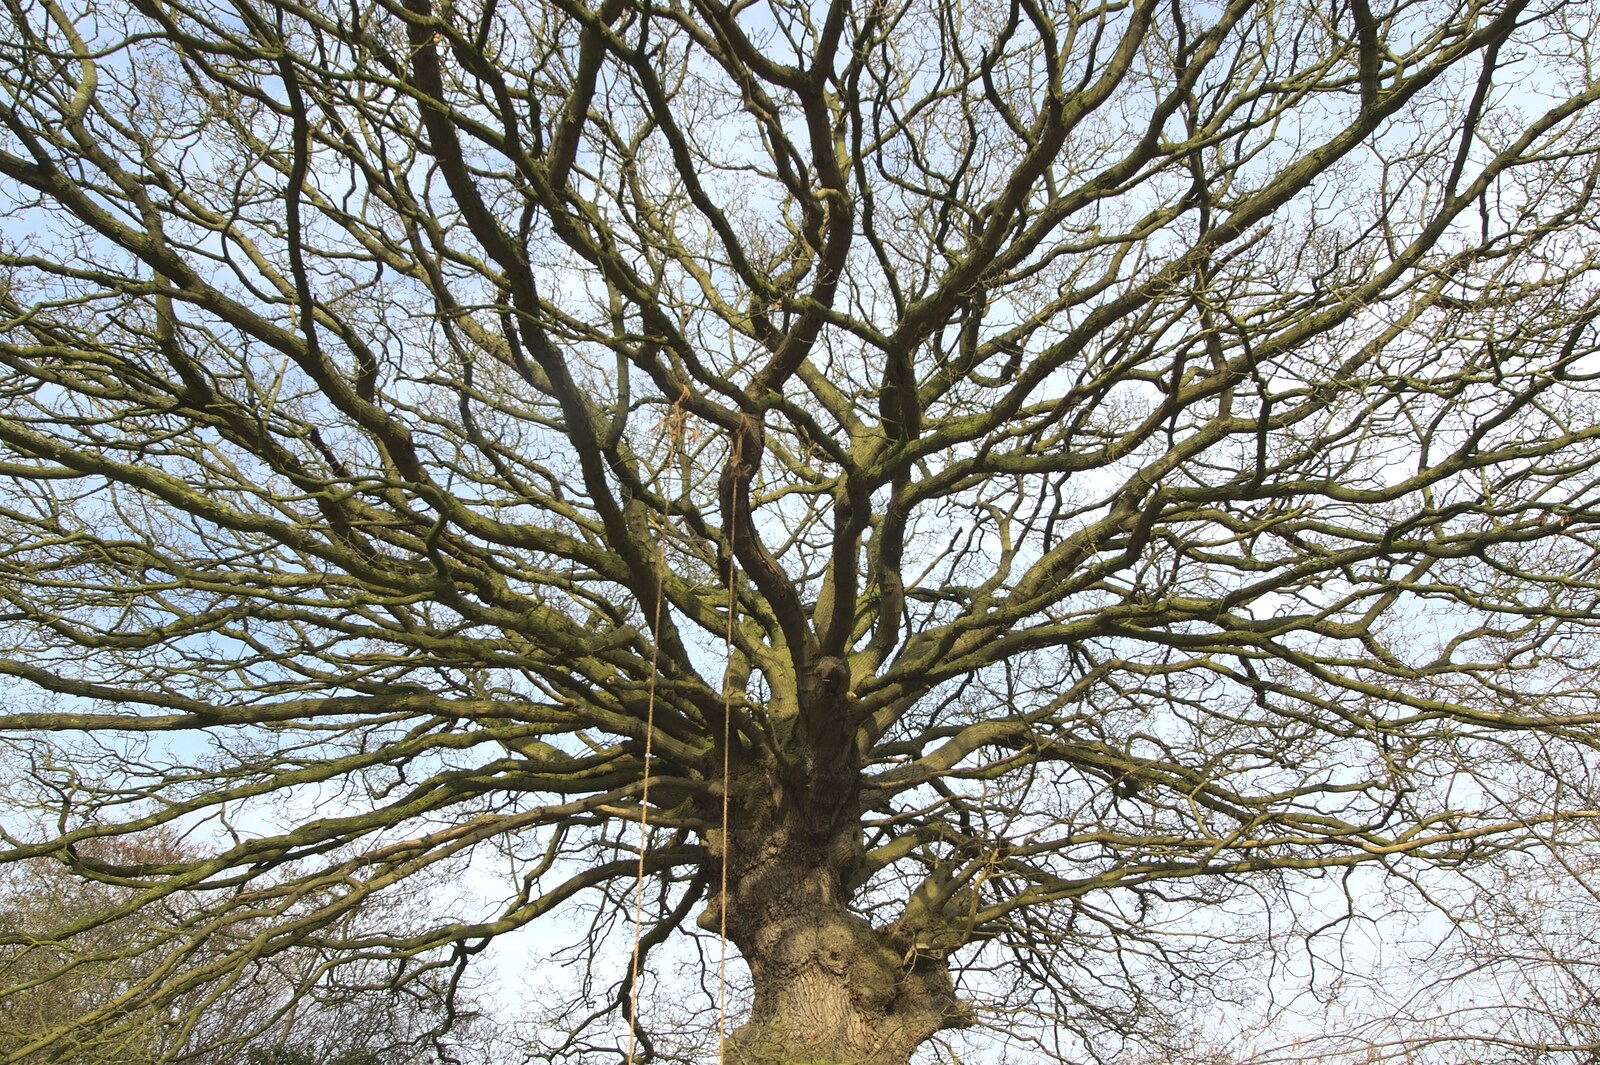 The impressive branches of the swinging tree from Oak's First Birthday, Thrandeston, Suffolk - 12th March 2011